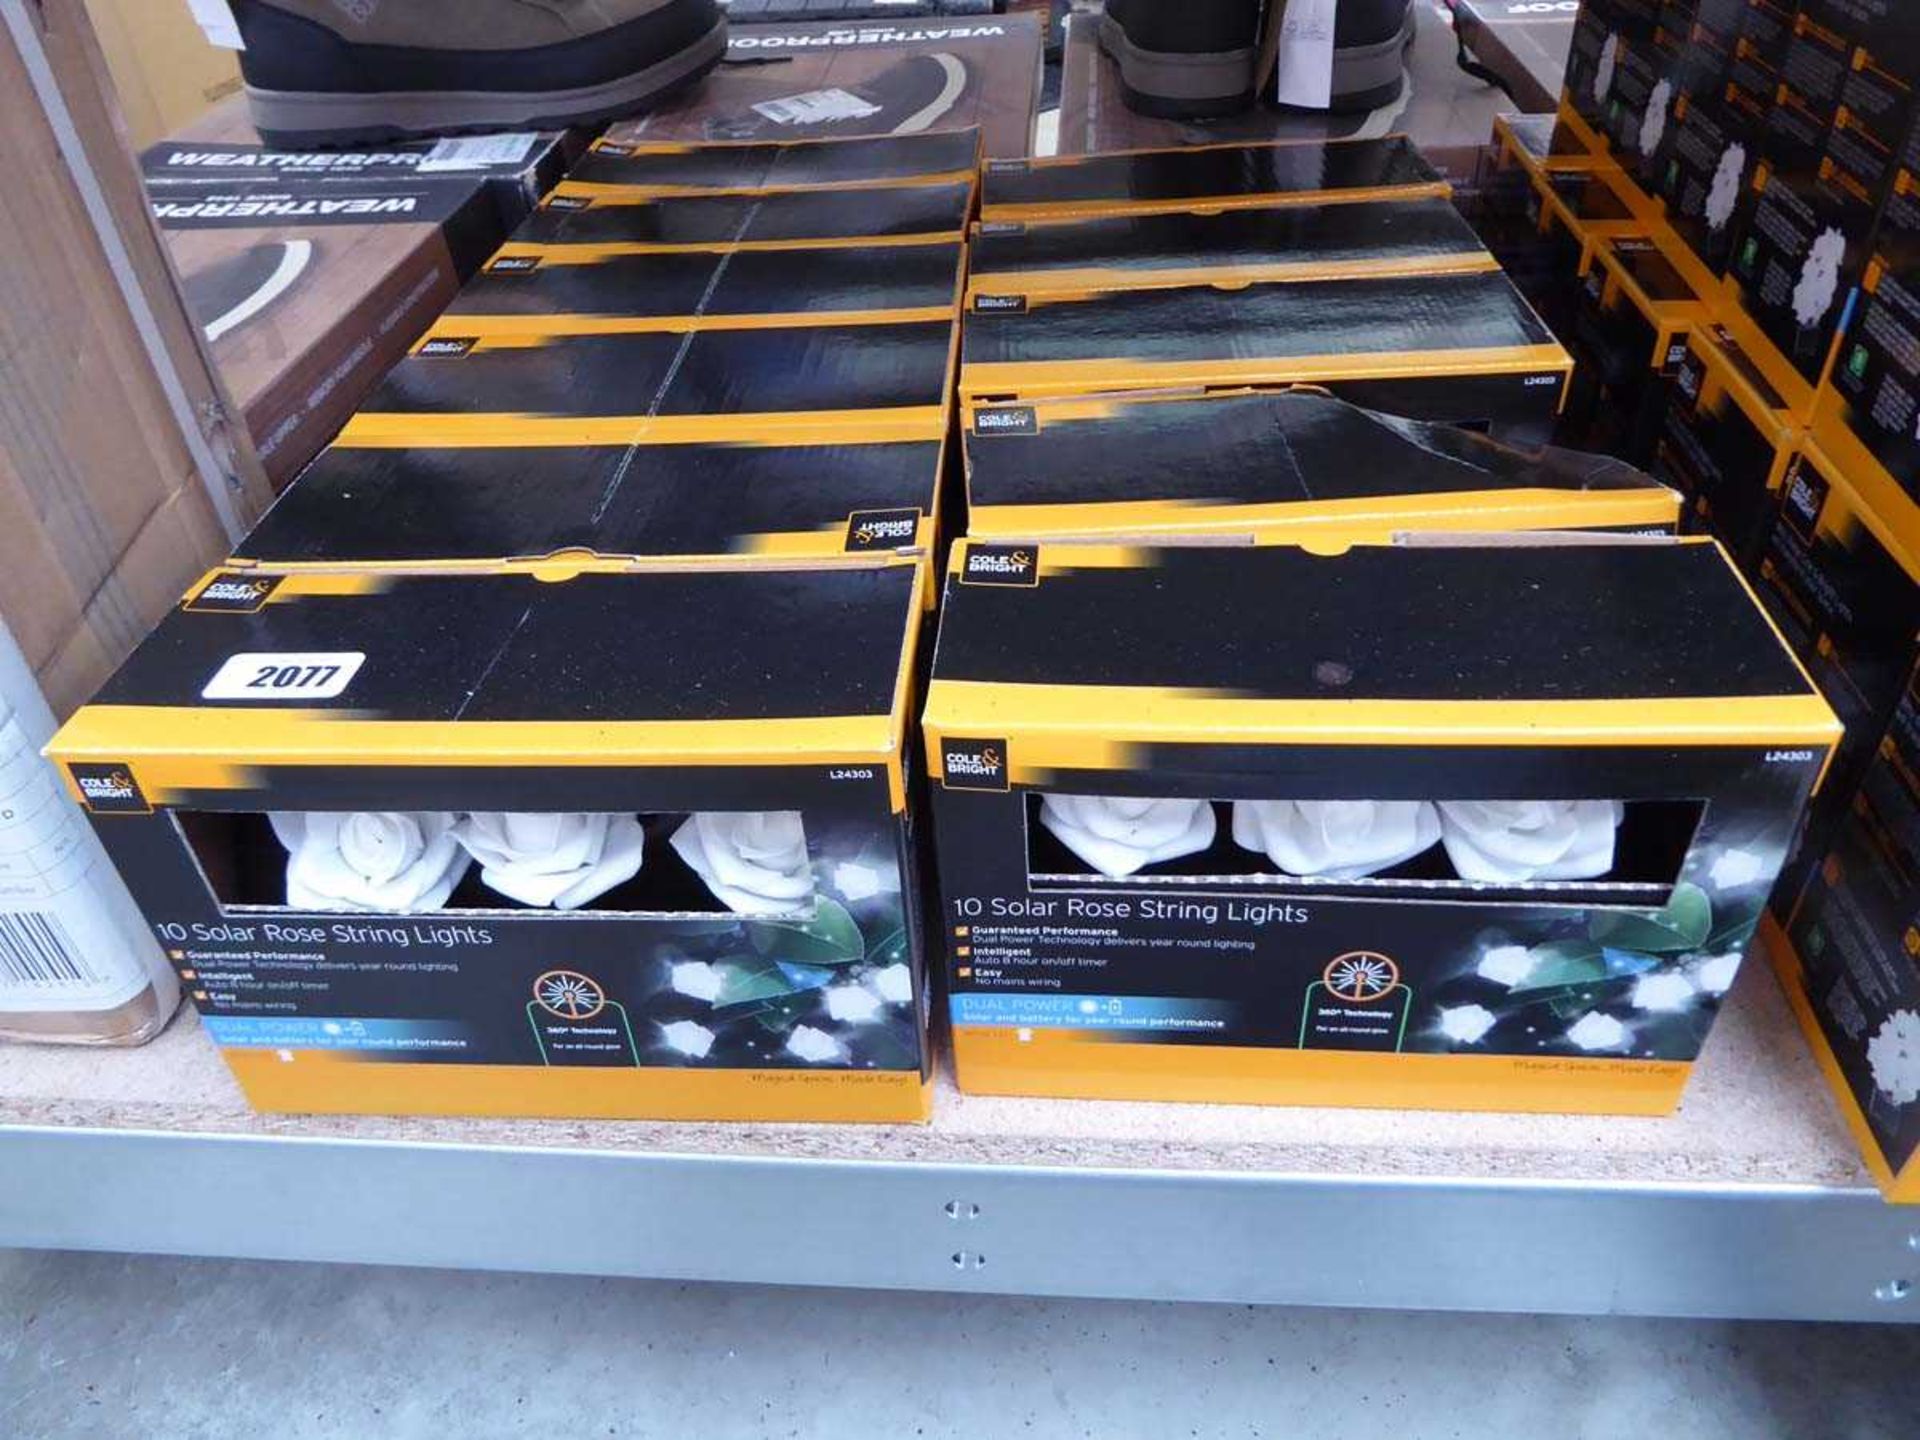 11 boxed sets of Cole & Bright solar 'Rose' string lights